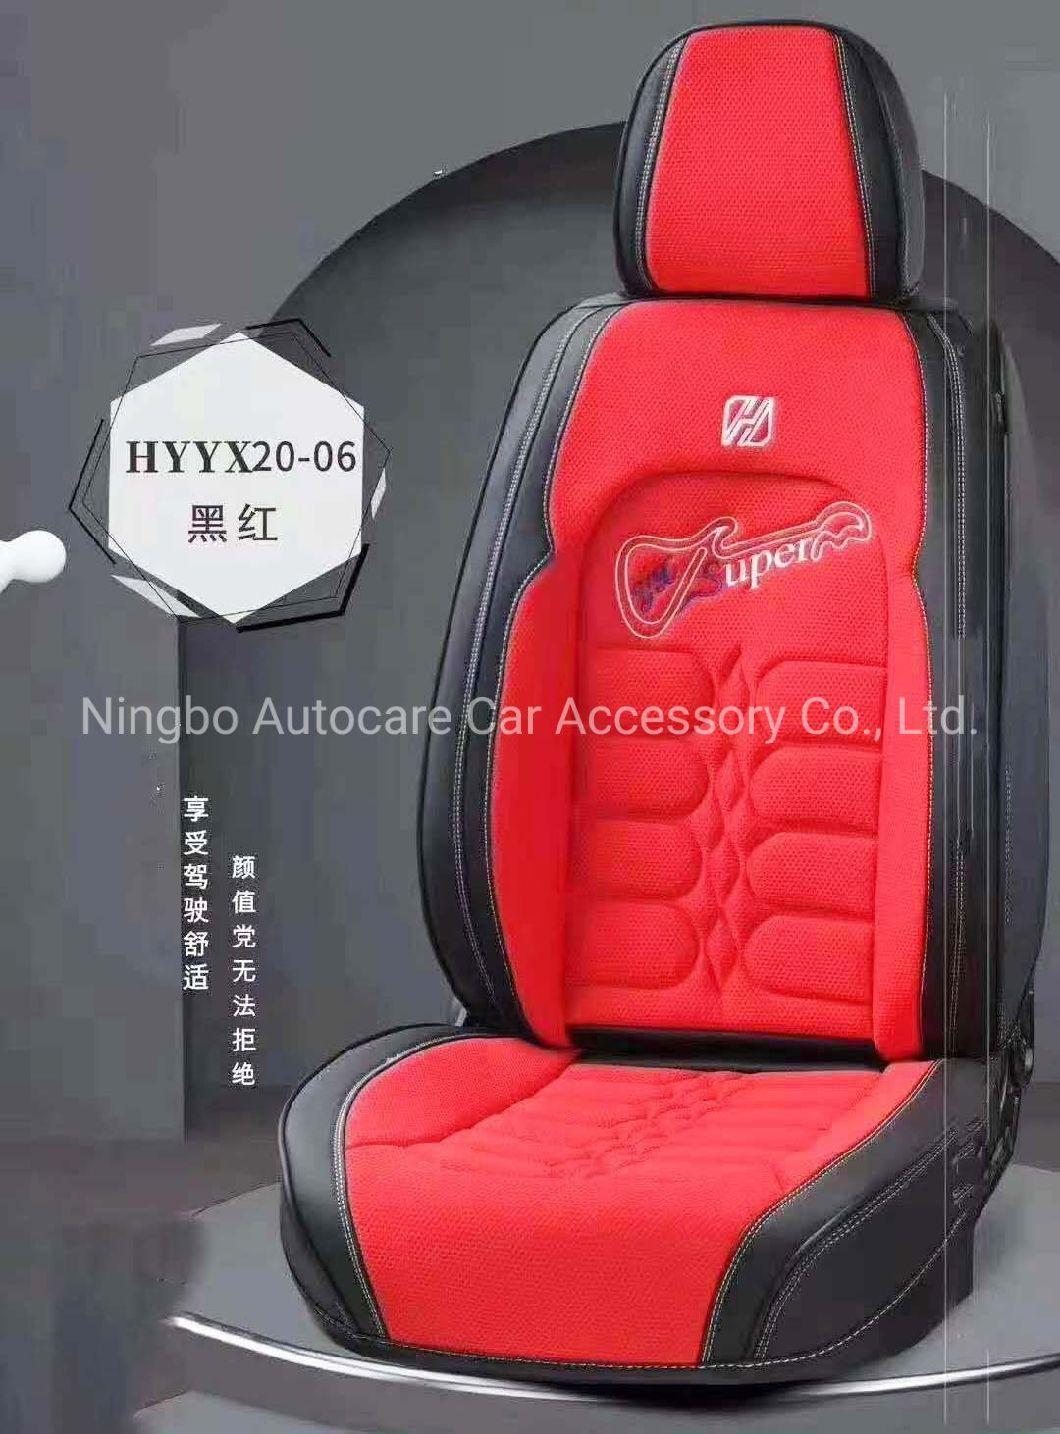 Car Accessories Car Decoration Car Seat Cushion Universal Full Covered Pure Leather 9d Car Seat Cover